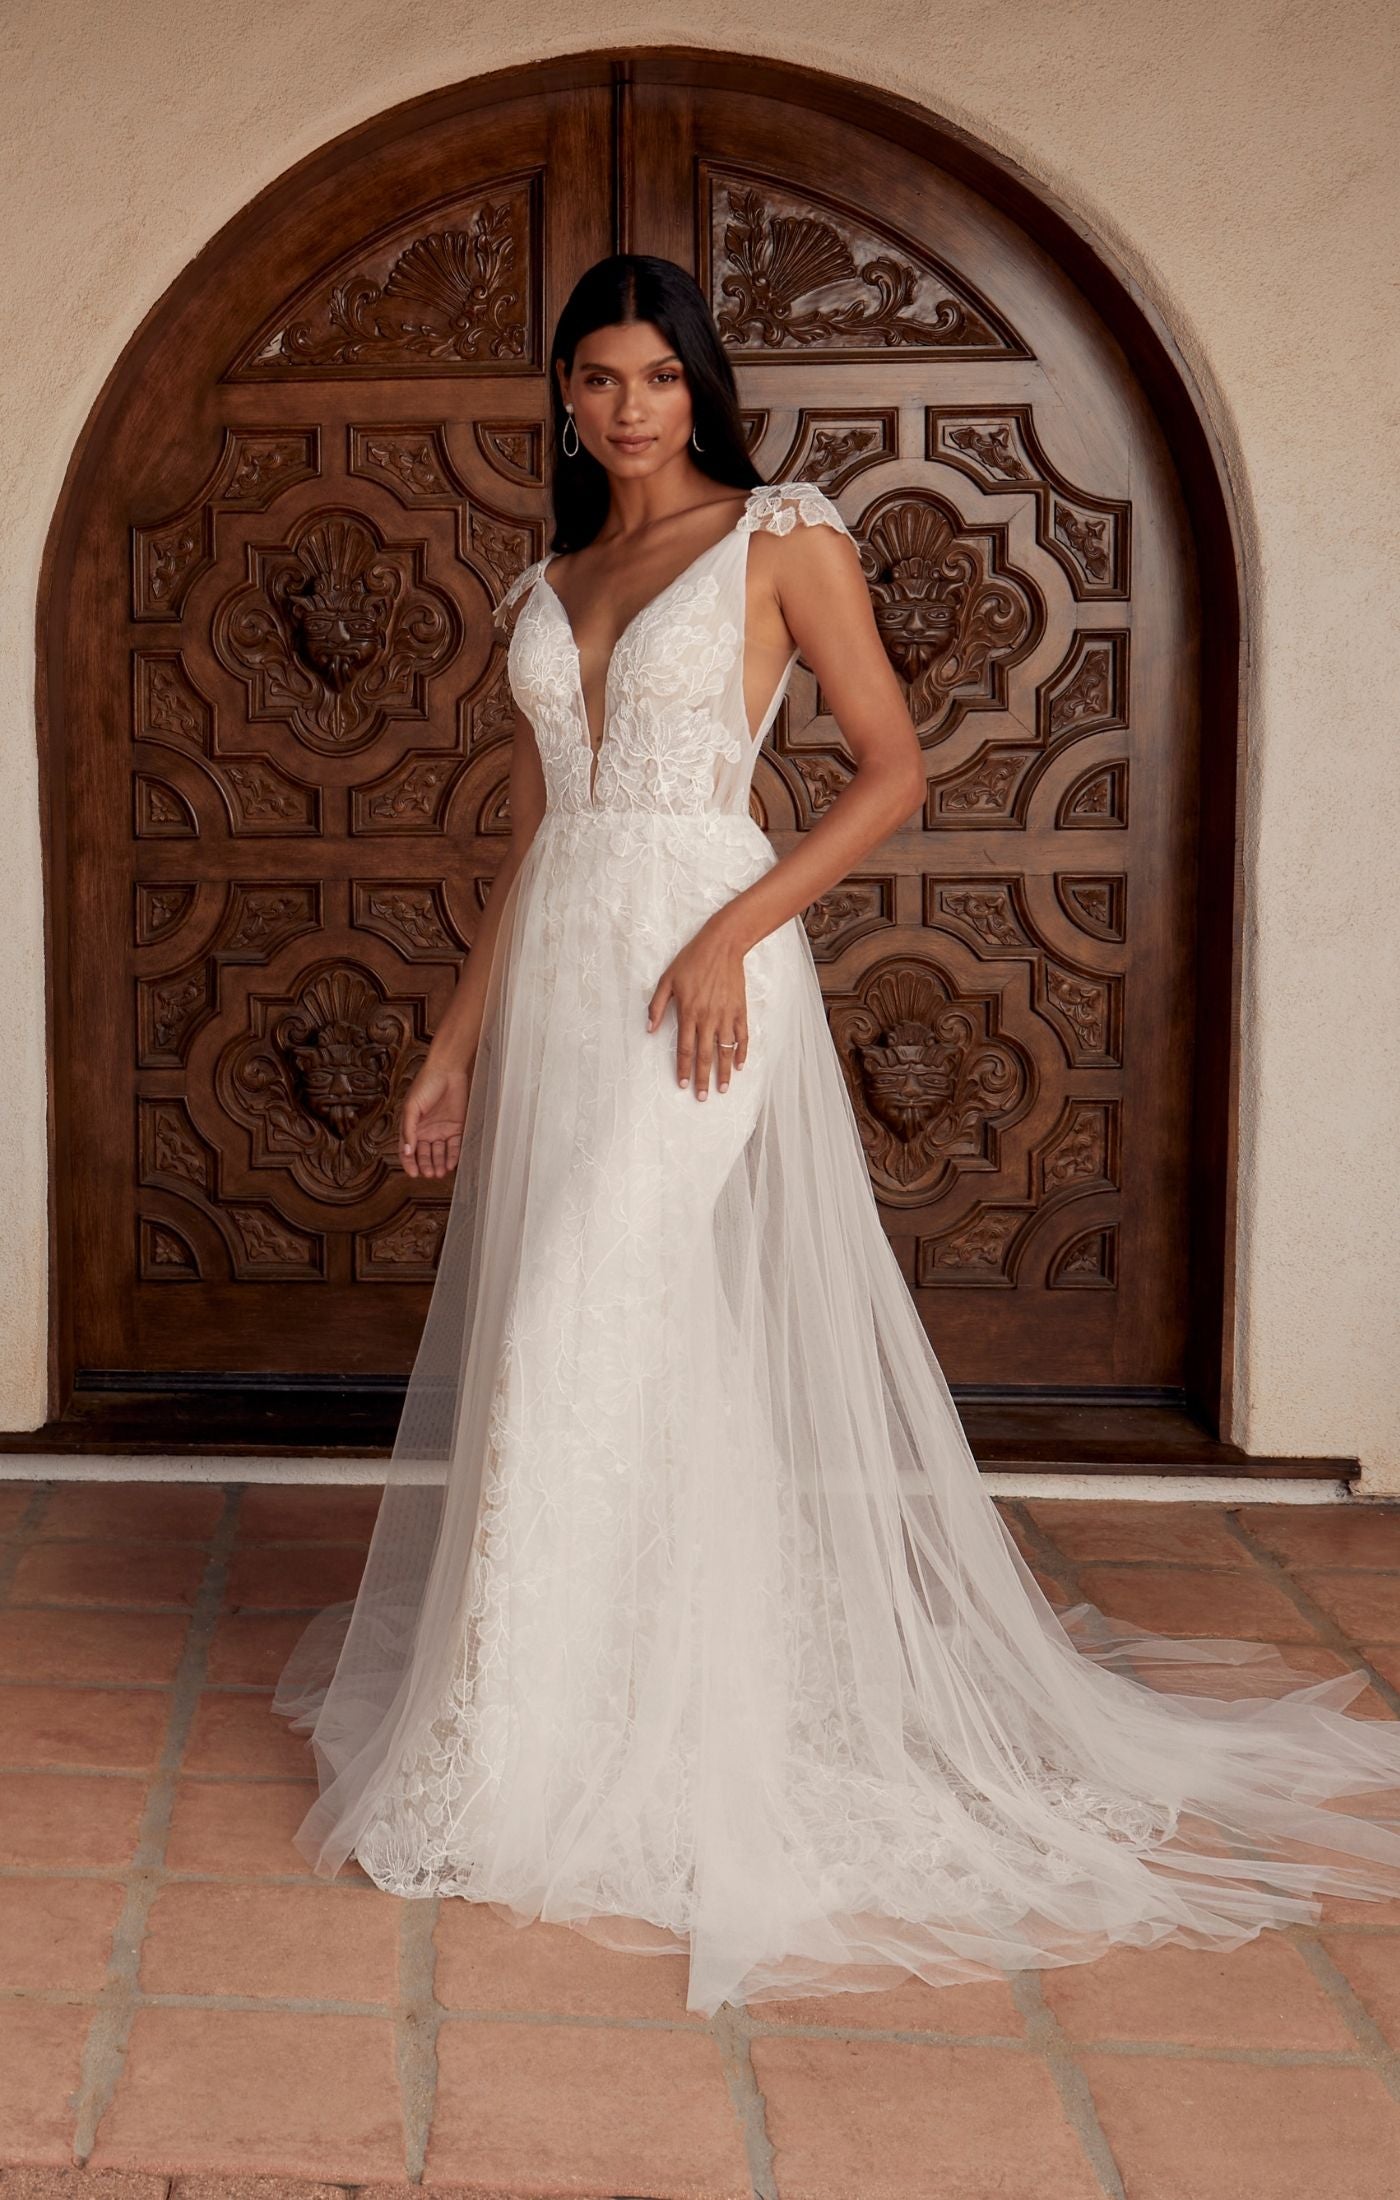 Cape Sleeves V-Neck Illusion Lace A-Line Wedding Dress - Ever-Pretty US